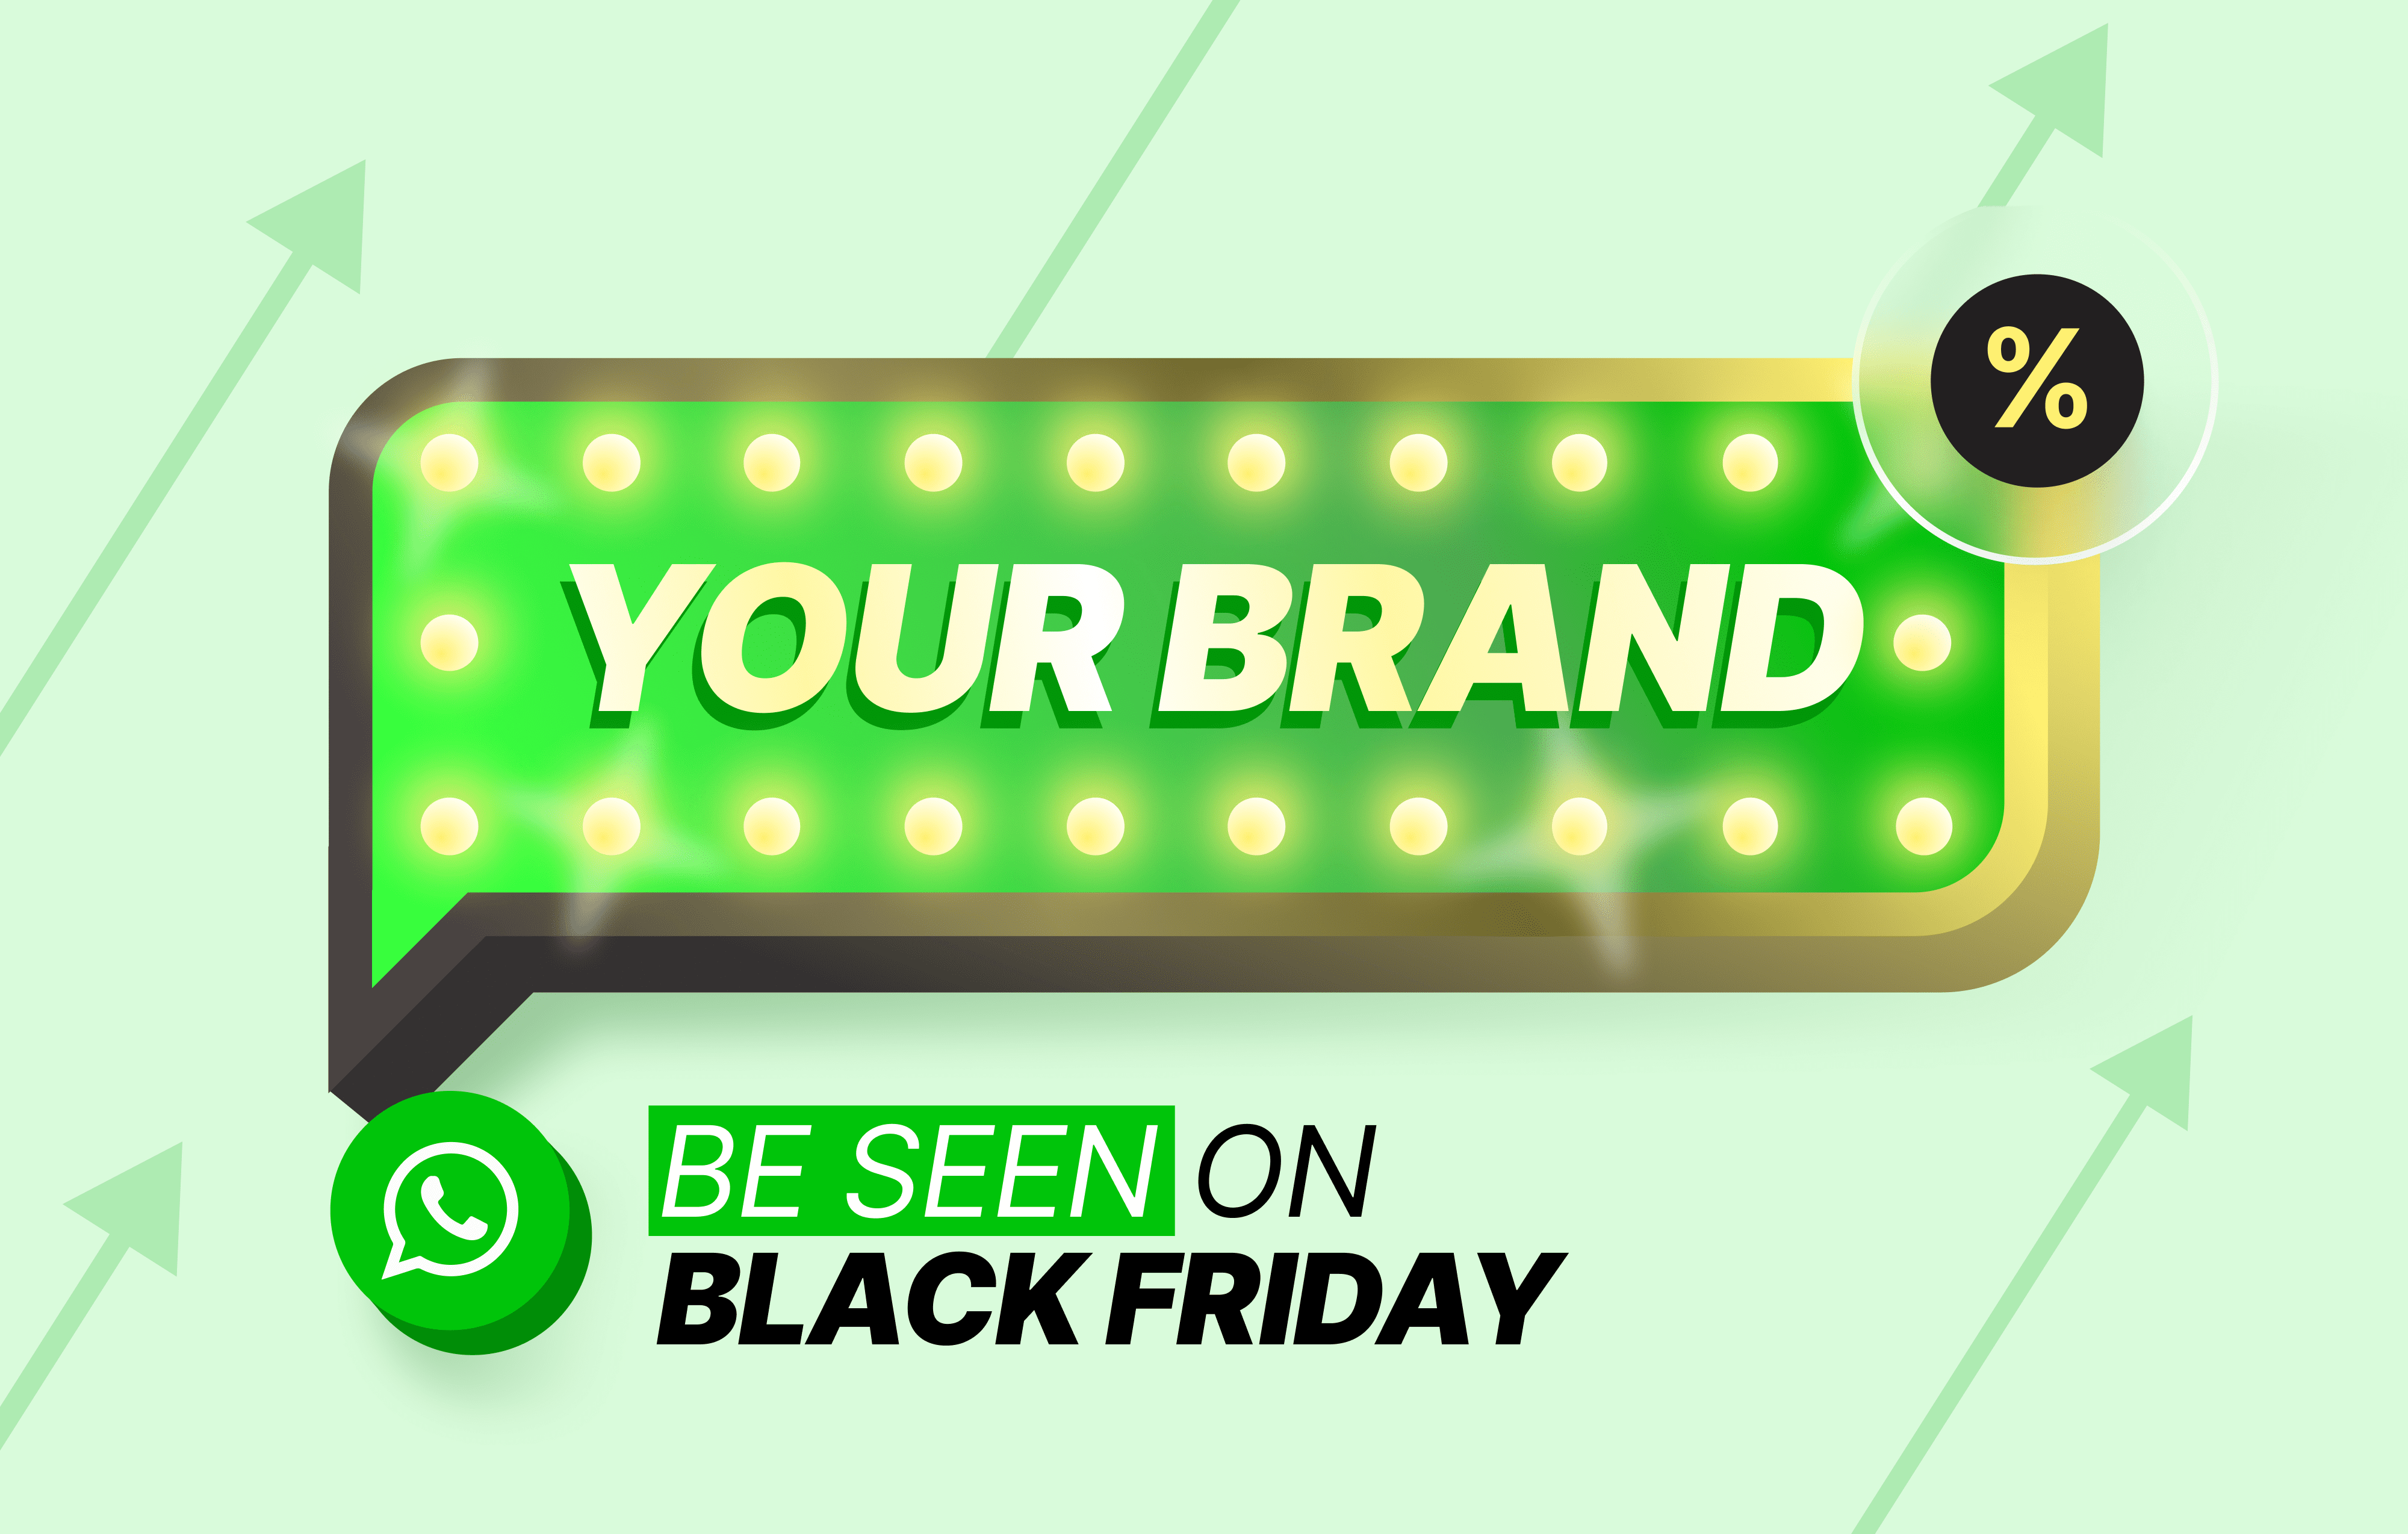 Smash Black Friday with WhatsApp: how to get ready in time.